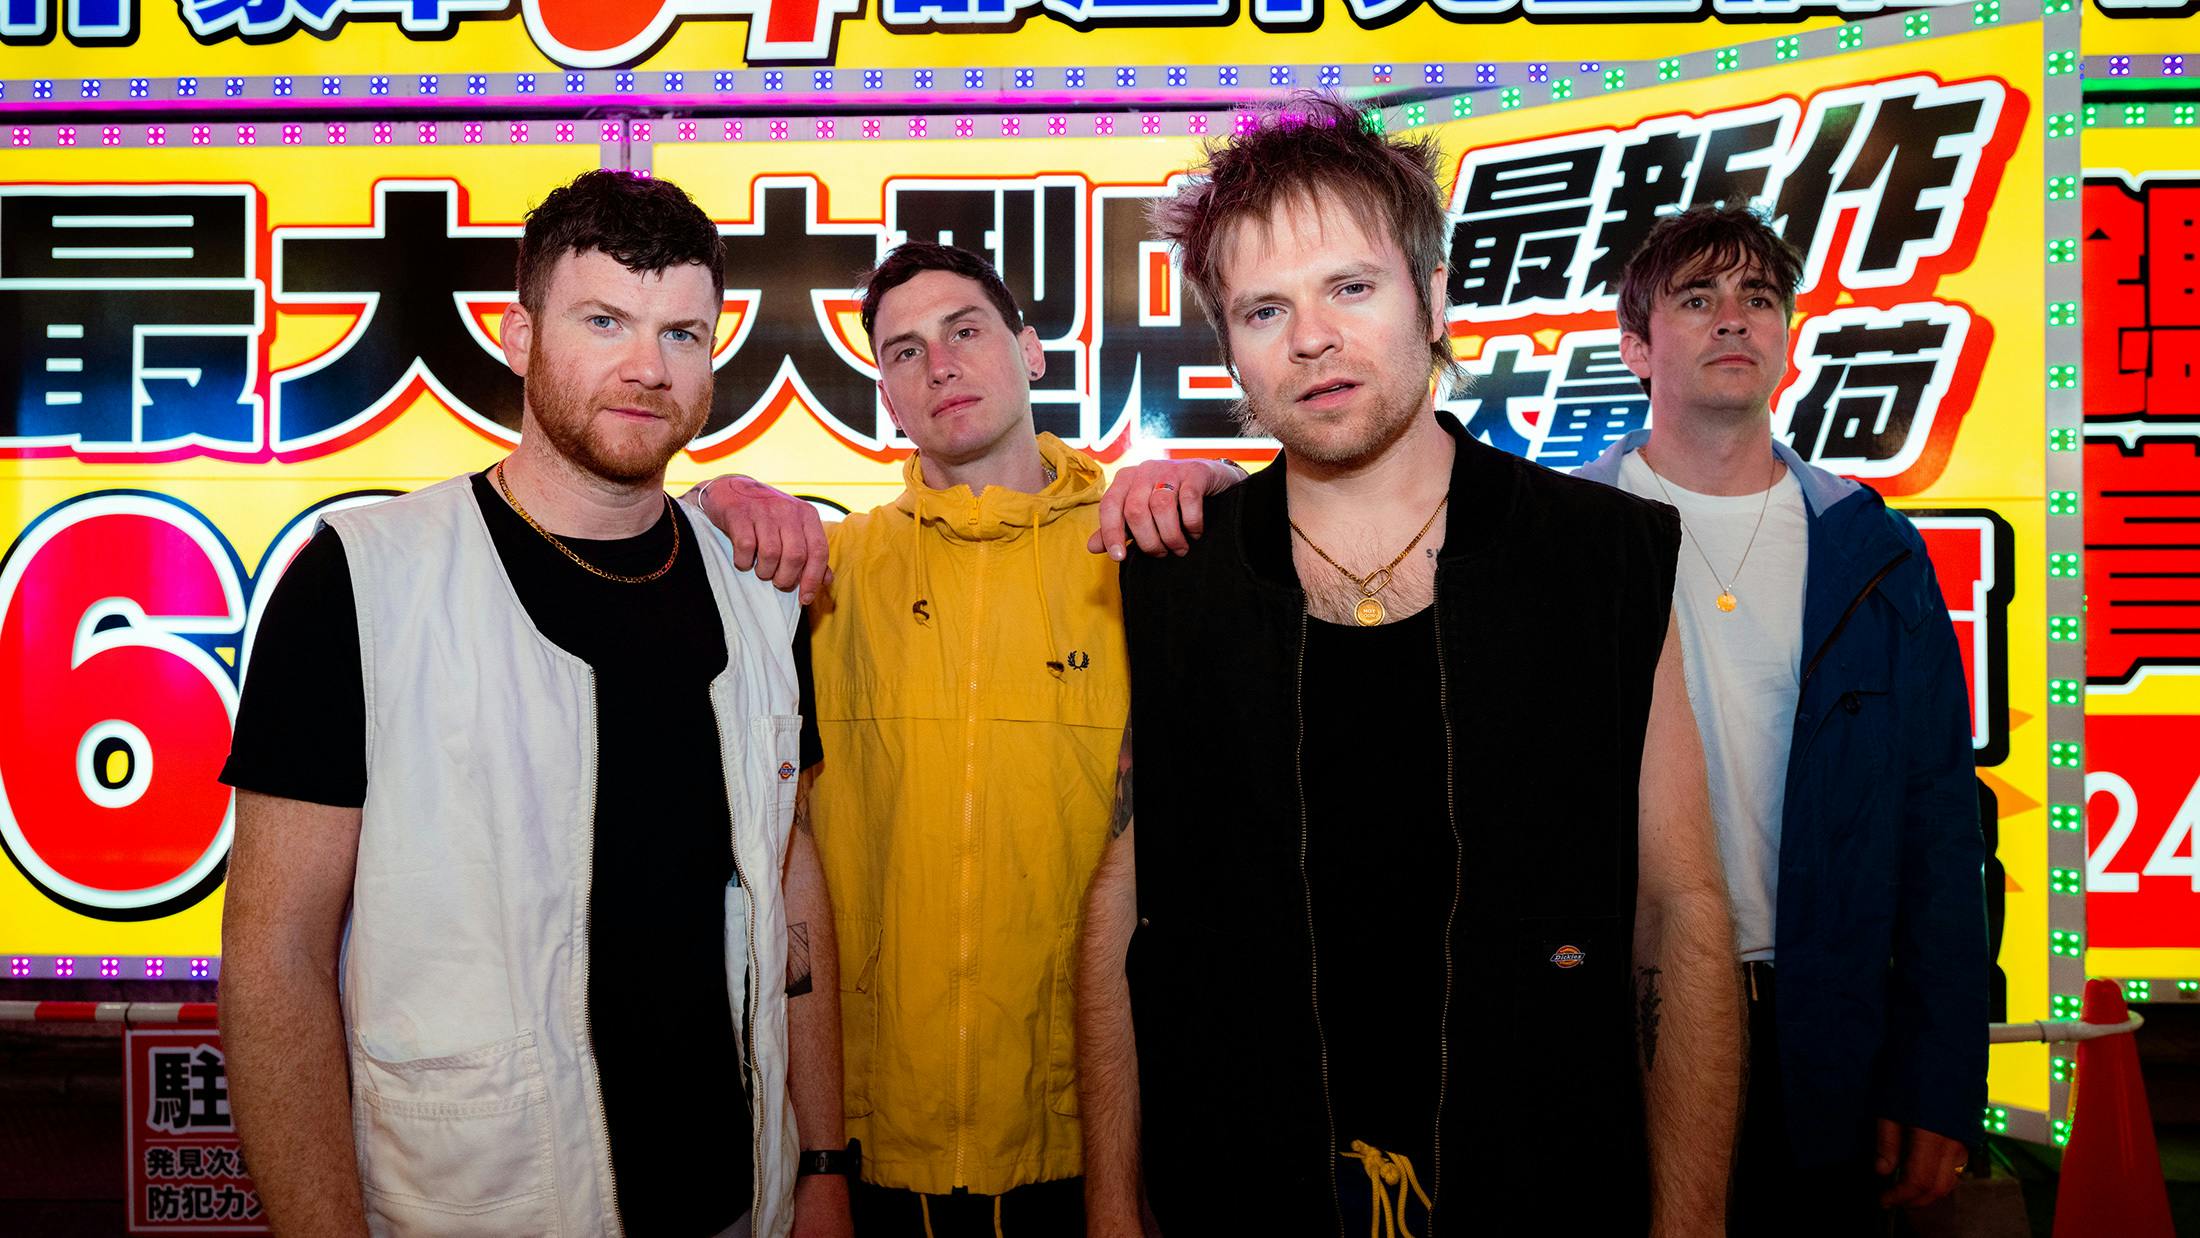 Enter Shikari: “There’s always some form of hope ready to be grasped, there’s always a possibility of something better”